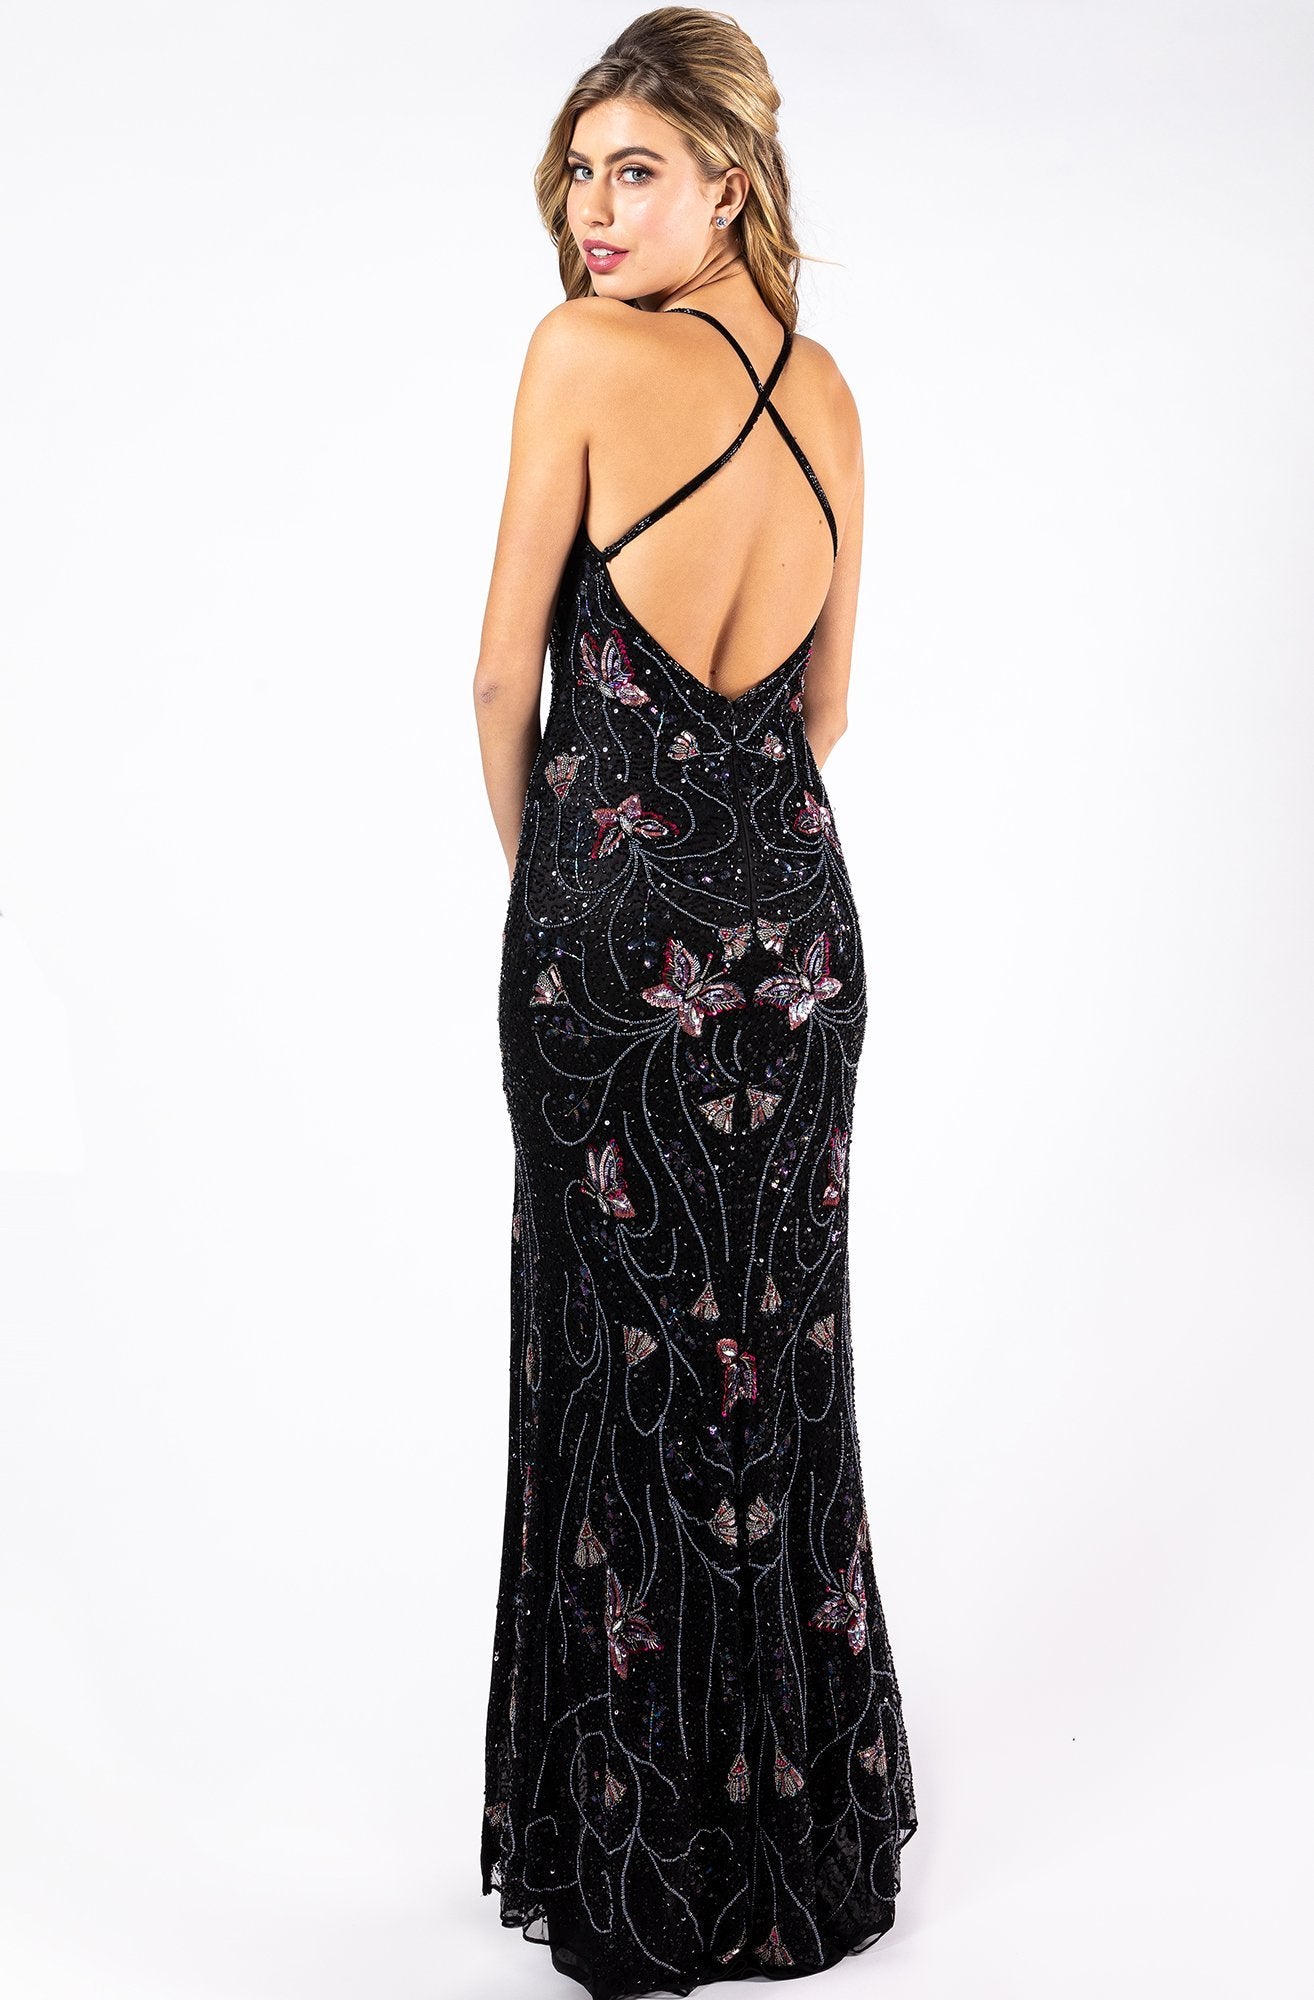 Primavera Couture - Beaded Butterfly Motif Dress with Slit 3258 In Black